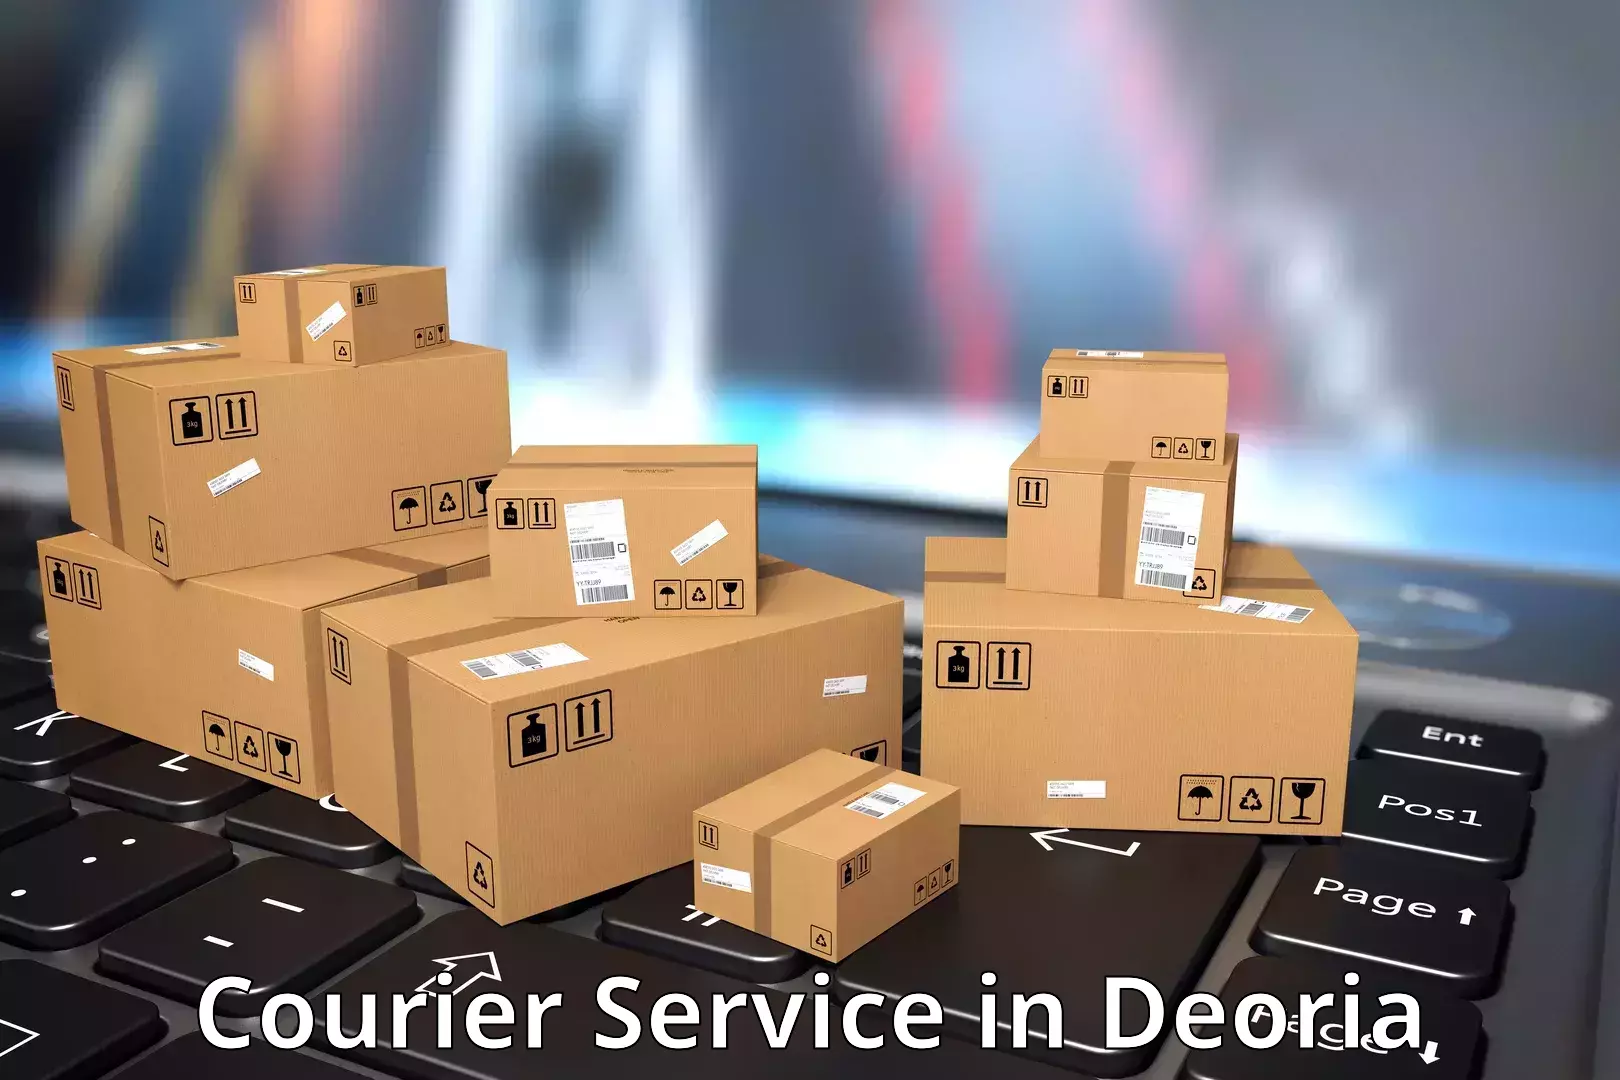 Parcel service for businesses in Deoria